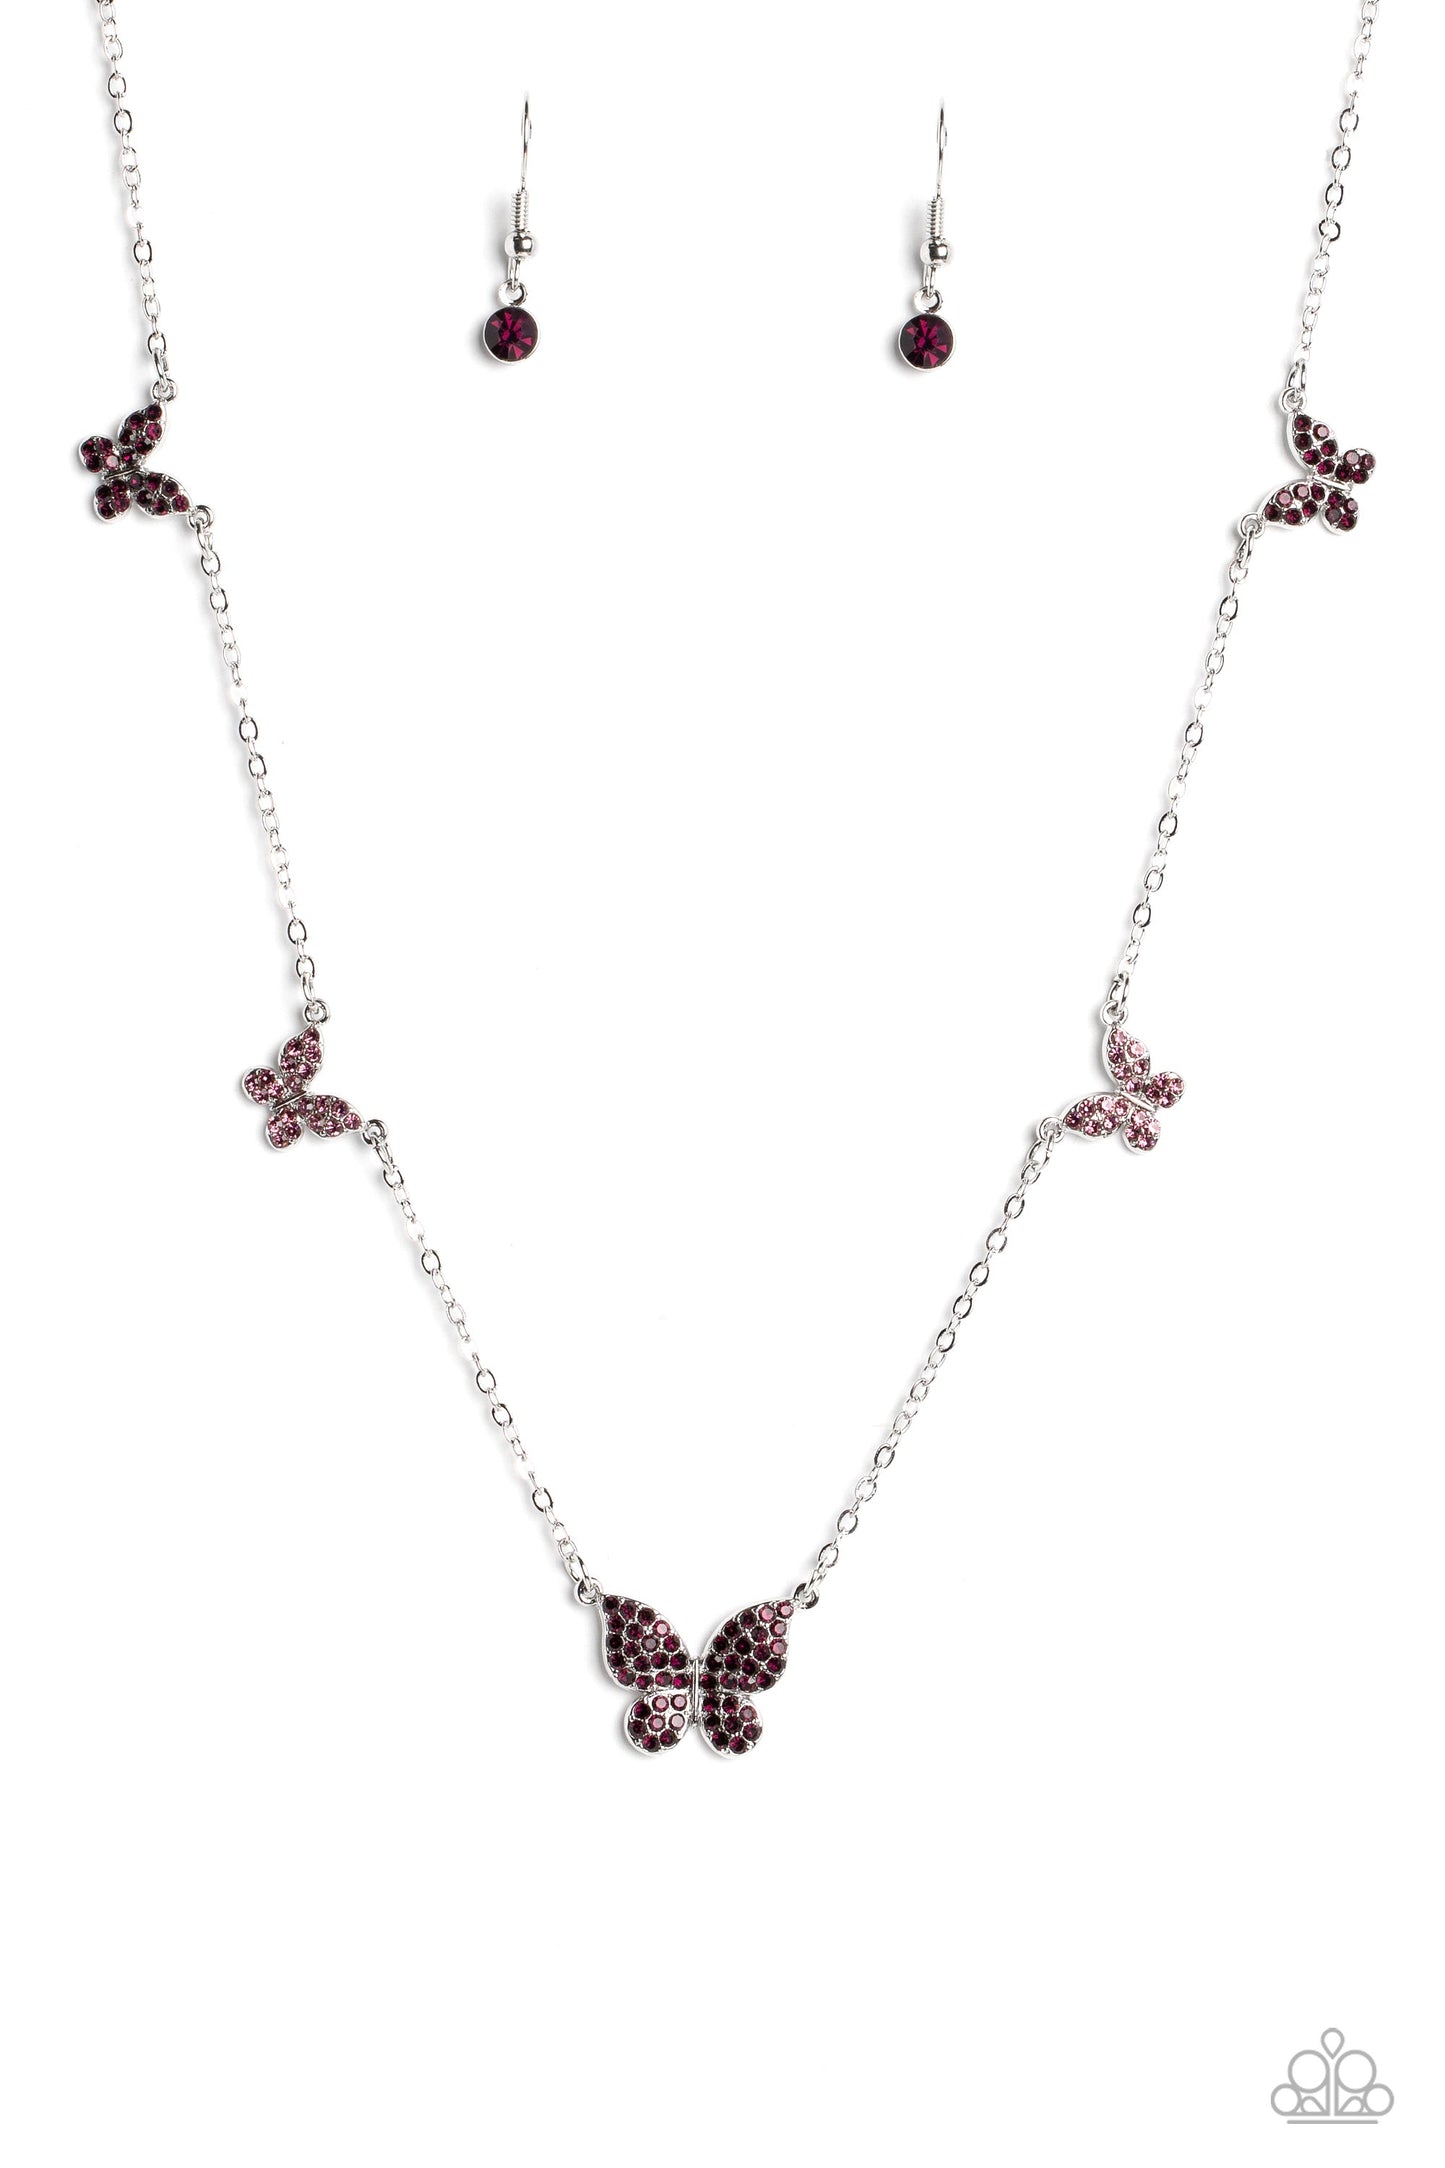 FAIRY Special - Purple Butterfly Necklace - Paparazzi Accessories - Floating along a dainty silver chain, a collection of silver butterflies in varying sizes coalesces around the neckline for a whimsical finish. Each butterfly features a monochromatic shimmer of amethyst and light amethyst rhinestones for a sparkly statement.